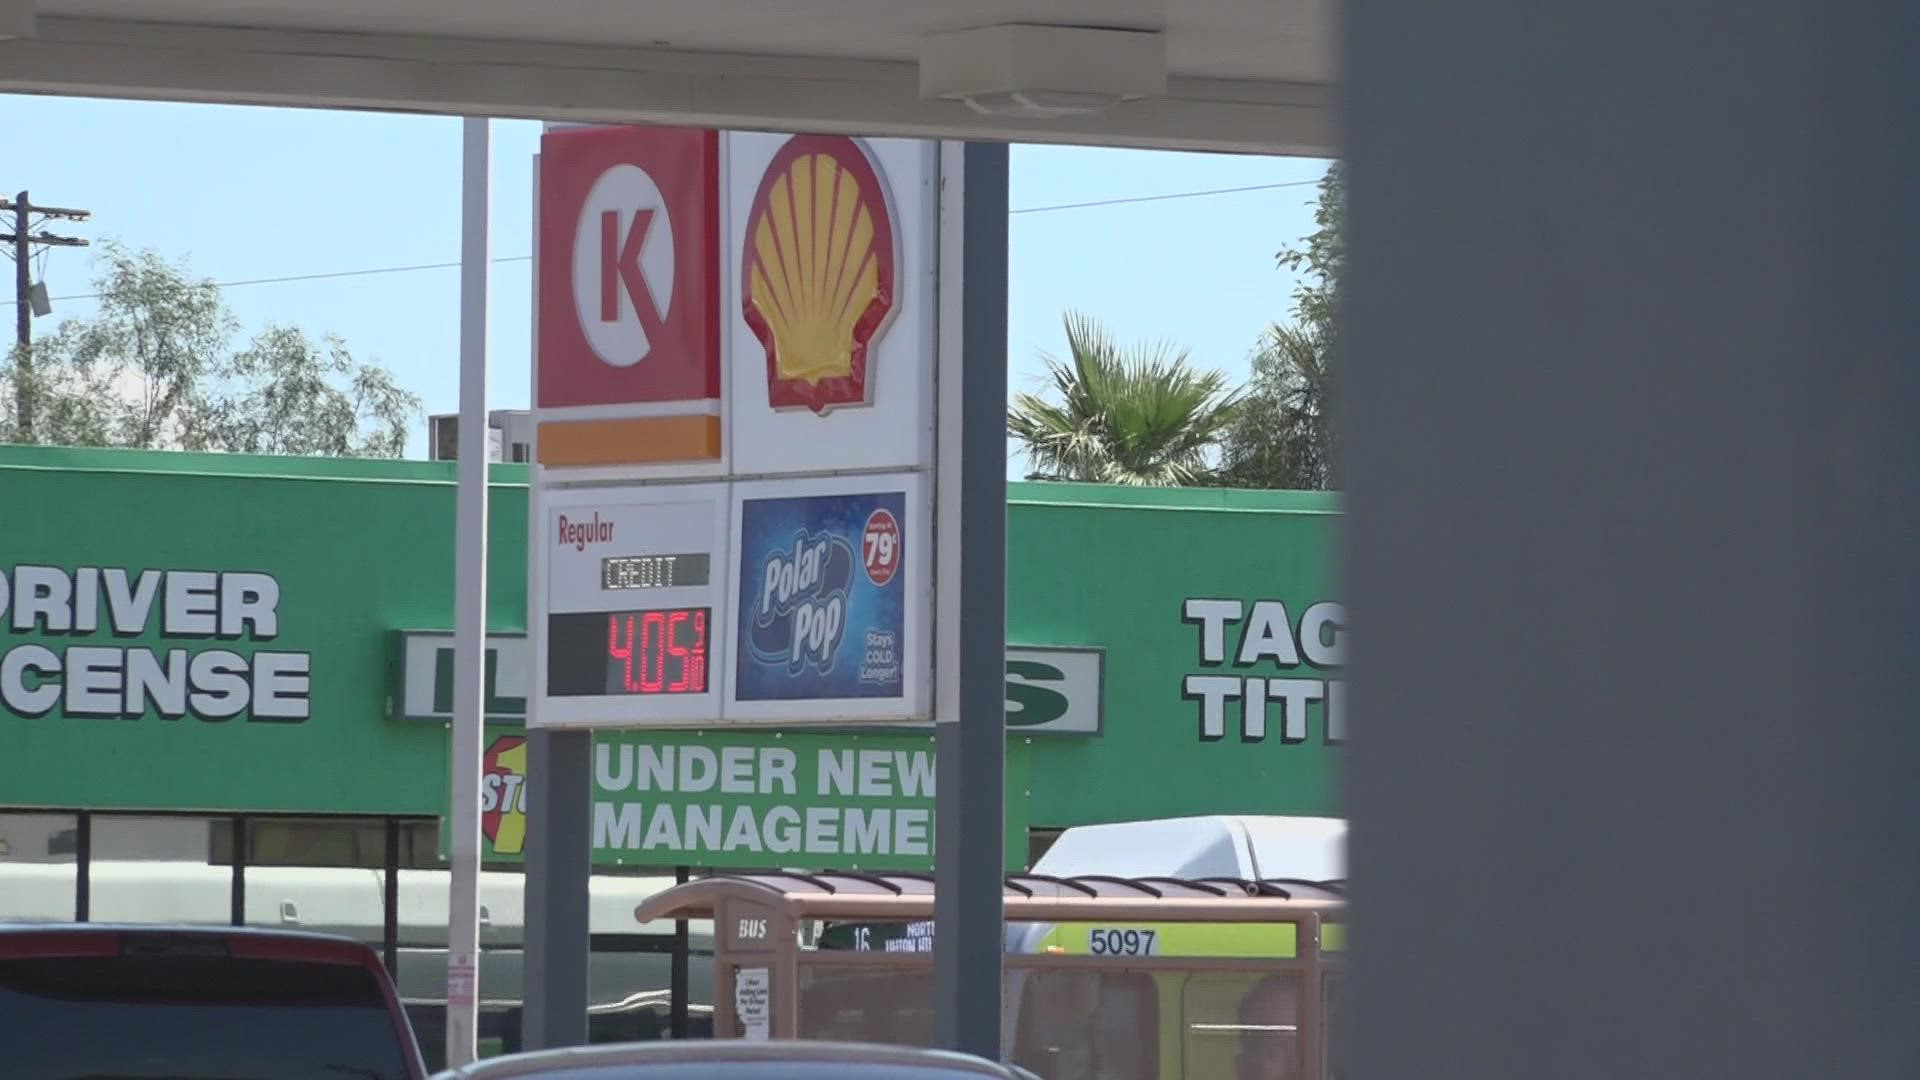 Average gas prices decreased nationally in the last week. But prices in Arizona increased and experts say it's due to issues at fuel refineries in California.